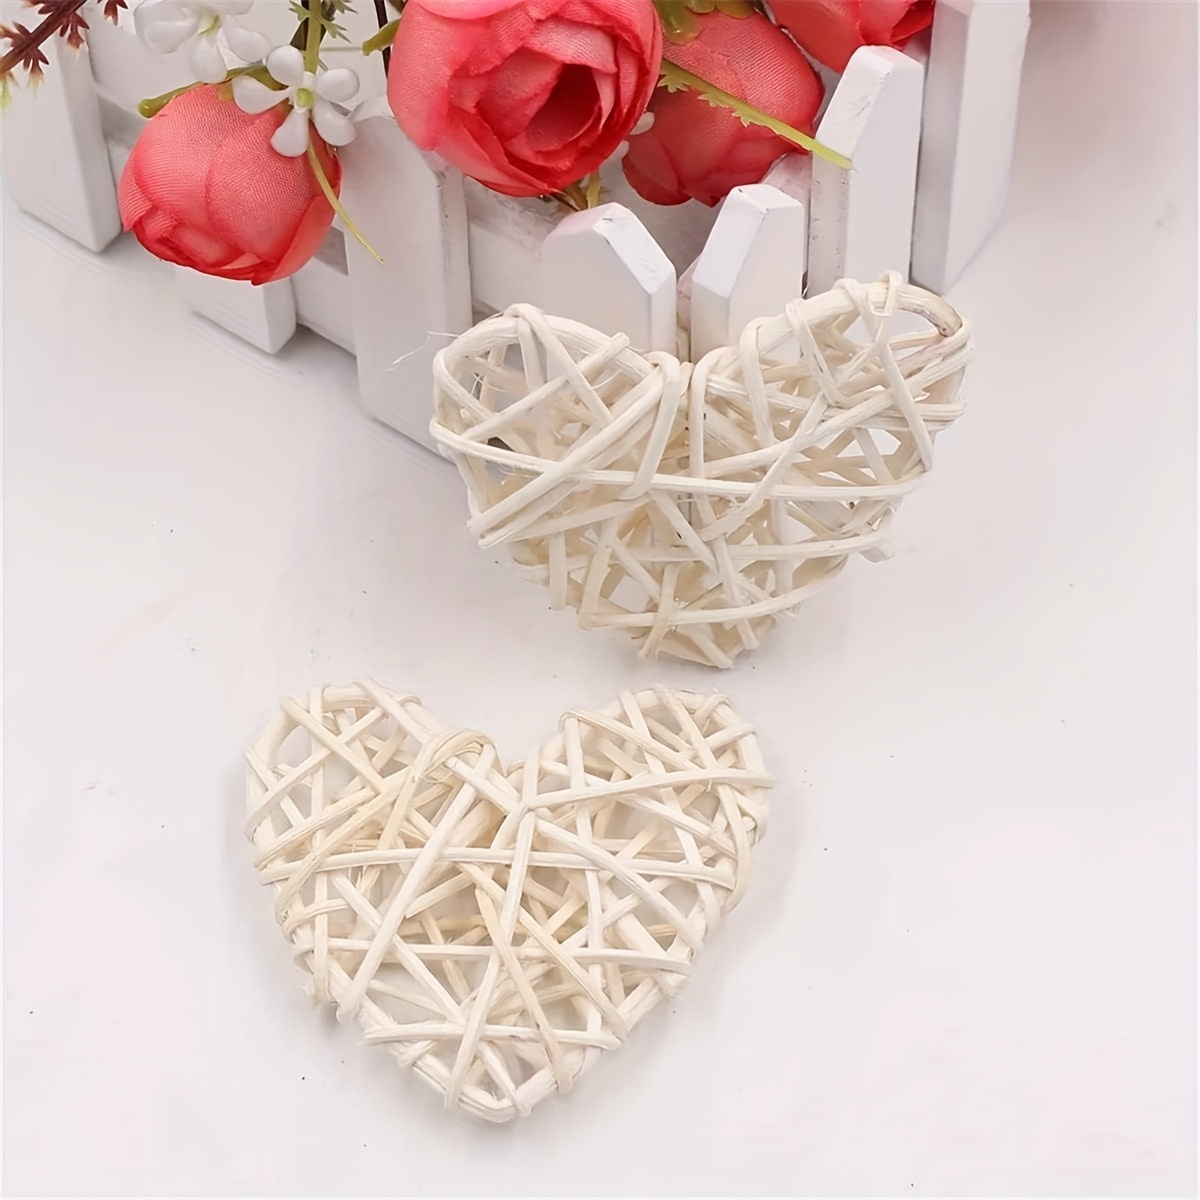  Geosar 24 Pieces Heart Rattan Balls, Valentines Day Rattan  Balls Natural Wicker Heart Shaped Balls 4 Colors for Valentine's Day  Wedding DIY Craft Home Decor Vase Fillers(Rattan, 4 Inch) : Home